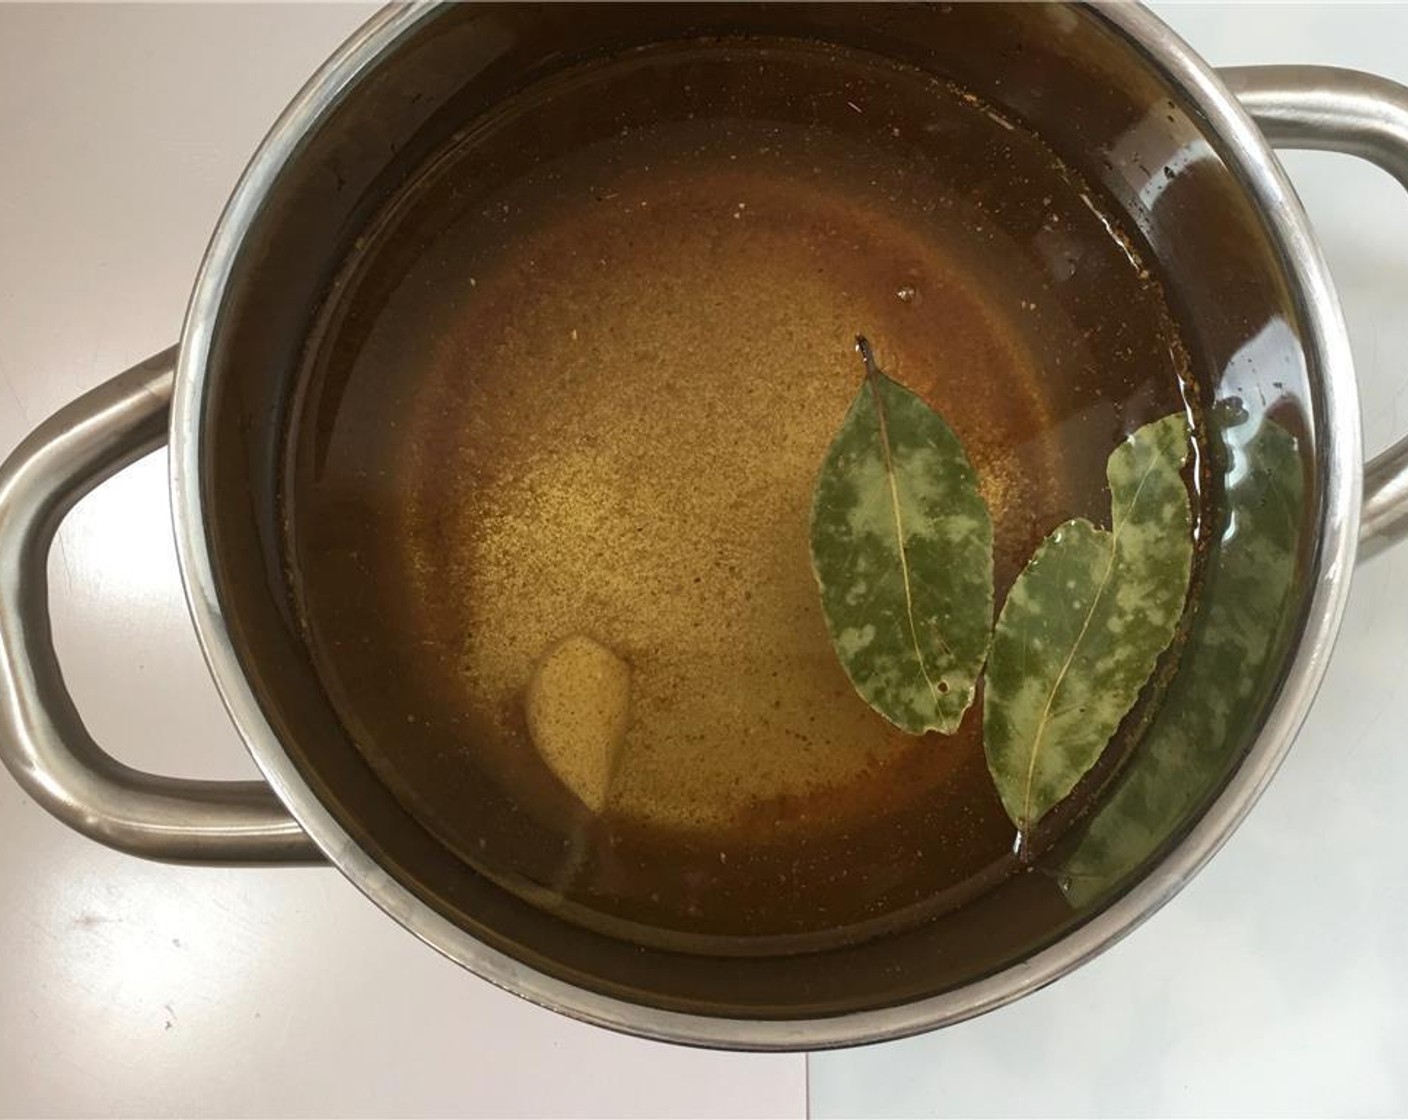 step 1 Fill a large and high pan with tap water and add 2 teaspoons of the Old Bay® Seasoning (1 Tbsp), Garlic (1 clove), and Bay Leaves (2). Season with a good dash of Salt (to taste) and Ground Black Pepper (to taste).